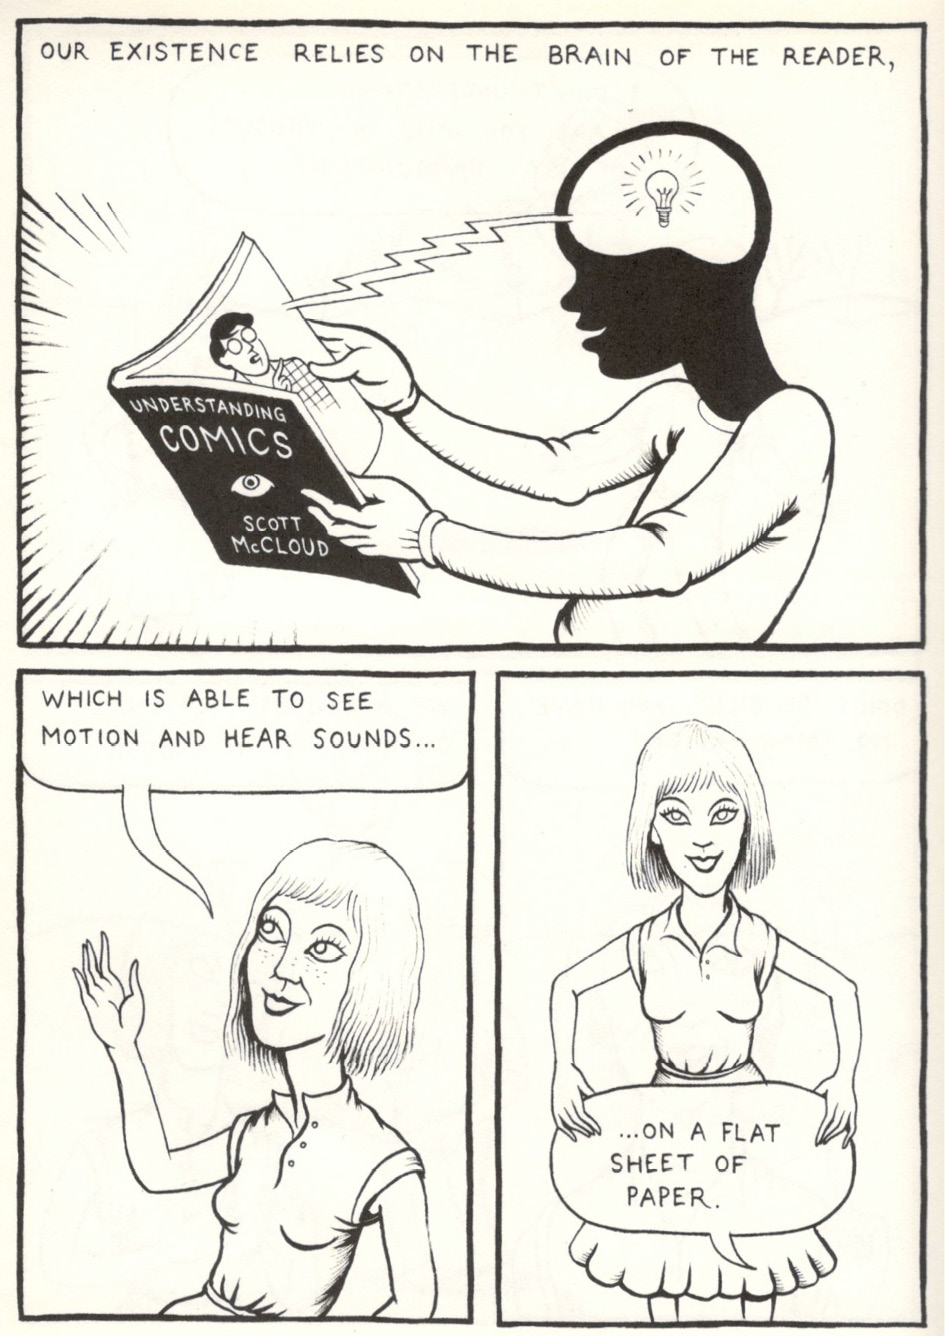 This page contains three panels. In the top panel, a reader holds a book called ""Understanding Comics"": a lightbulb lights up in their brain. A caption reads: ""Our existence relies on the brain of the reader..."". In the bottom panels, the rest of this sentence appears in speech bubles that are first spoken, then held in her hands by a woman. They read: ""which is able to see motions and hear sounds""... ""on a flat sheet of paper.